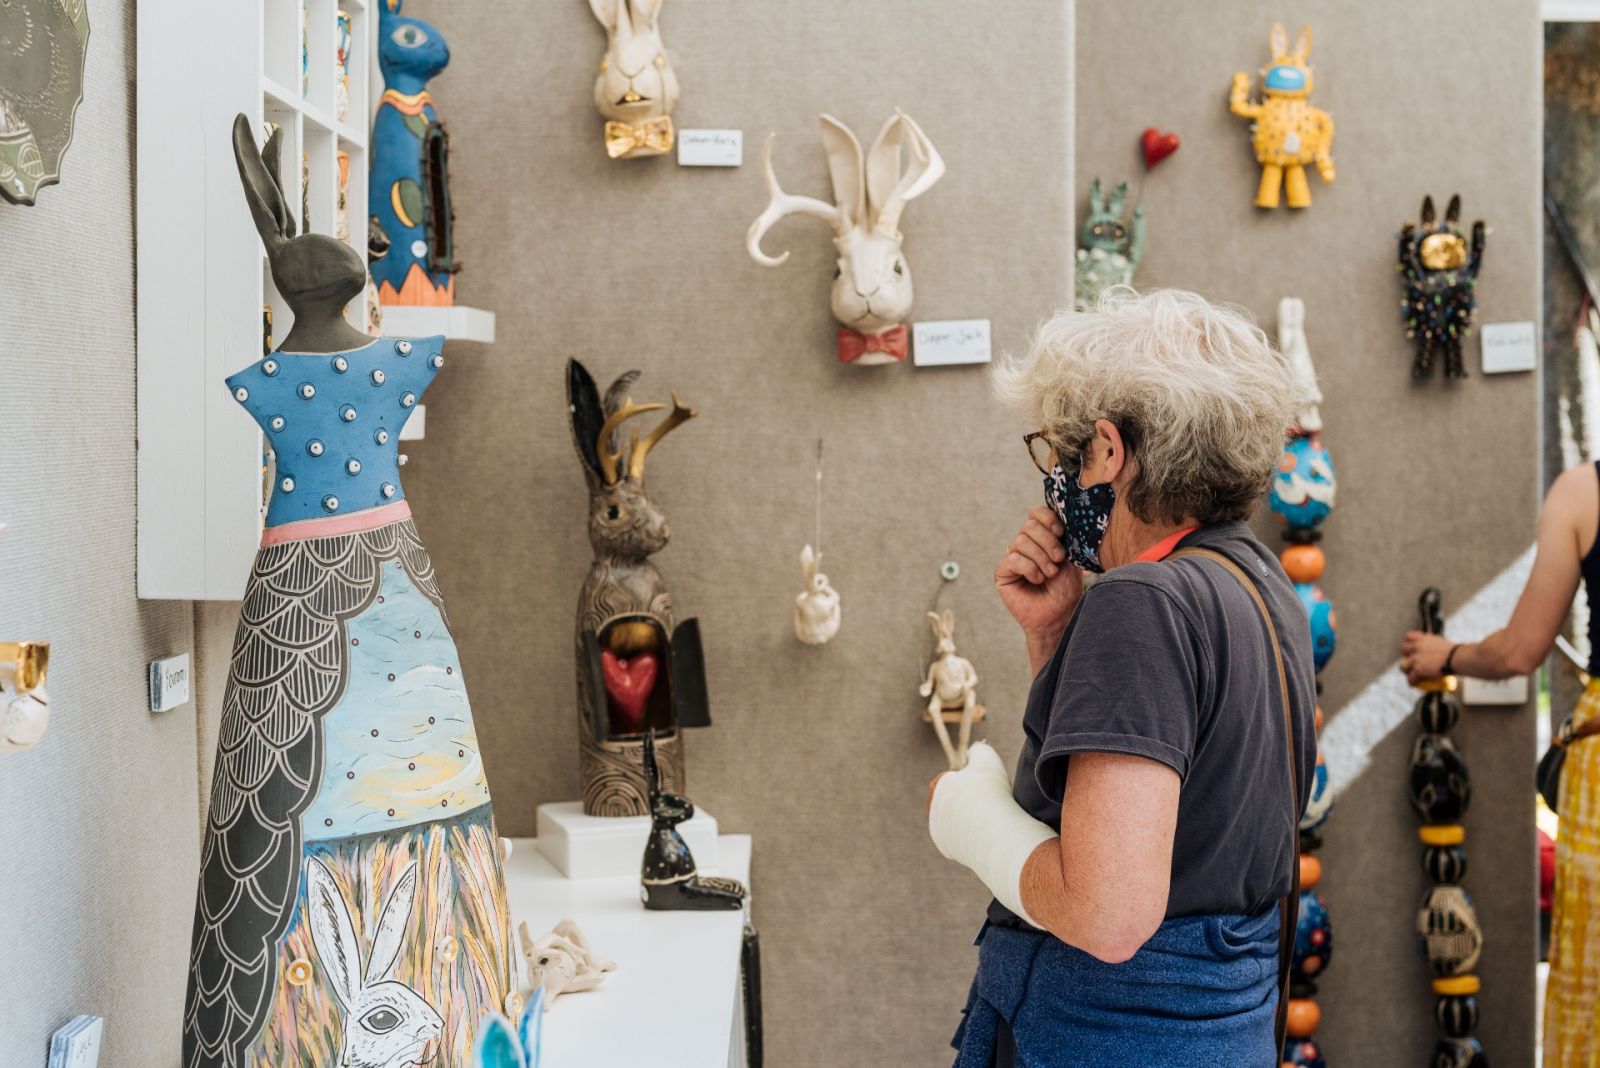  Reiko Uchytil displays her ceramic sculpture collection at her booth. (Photo/Provided)